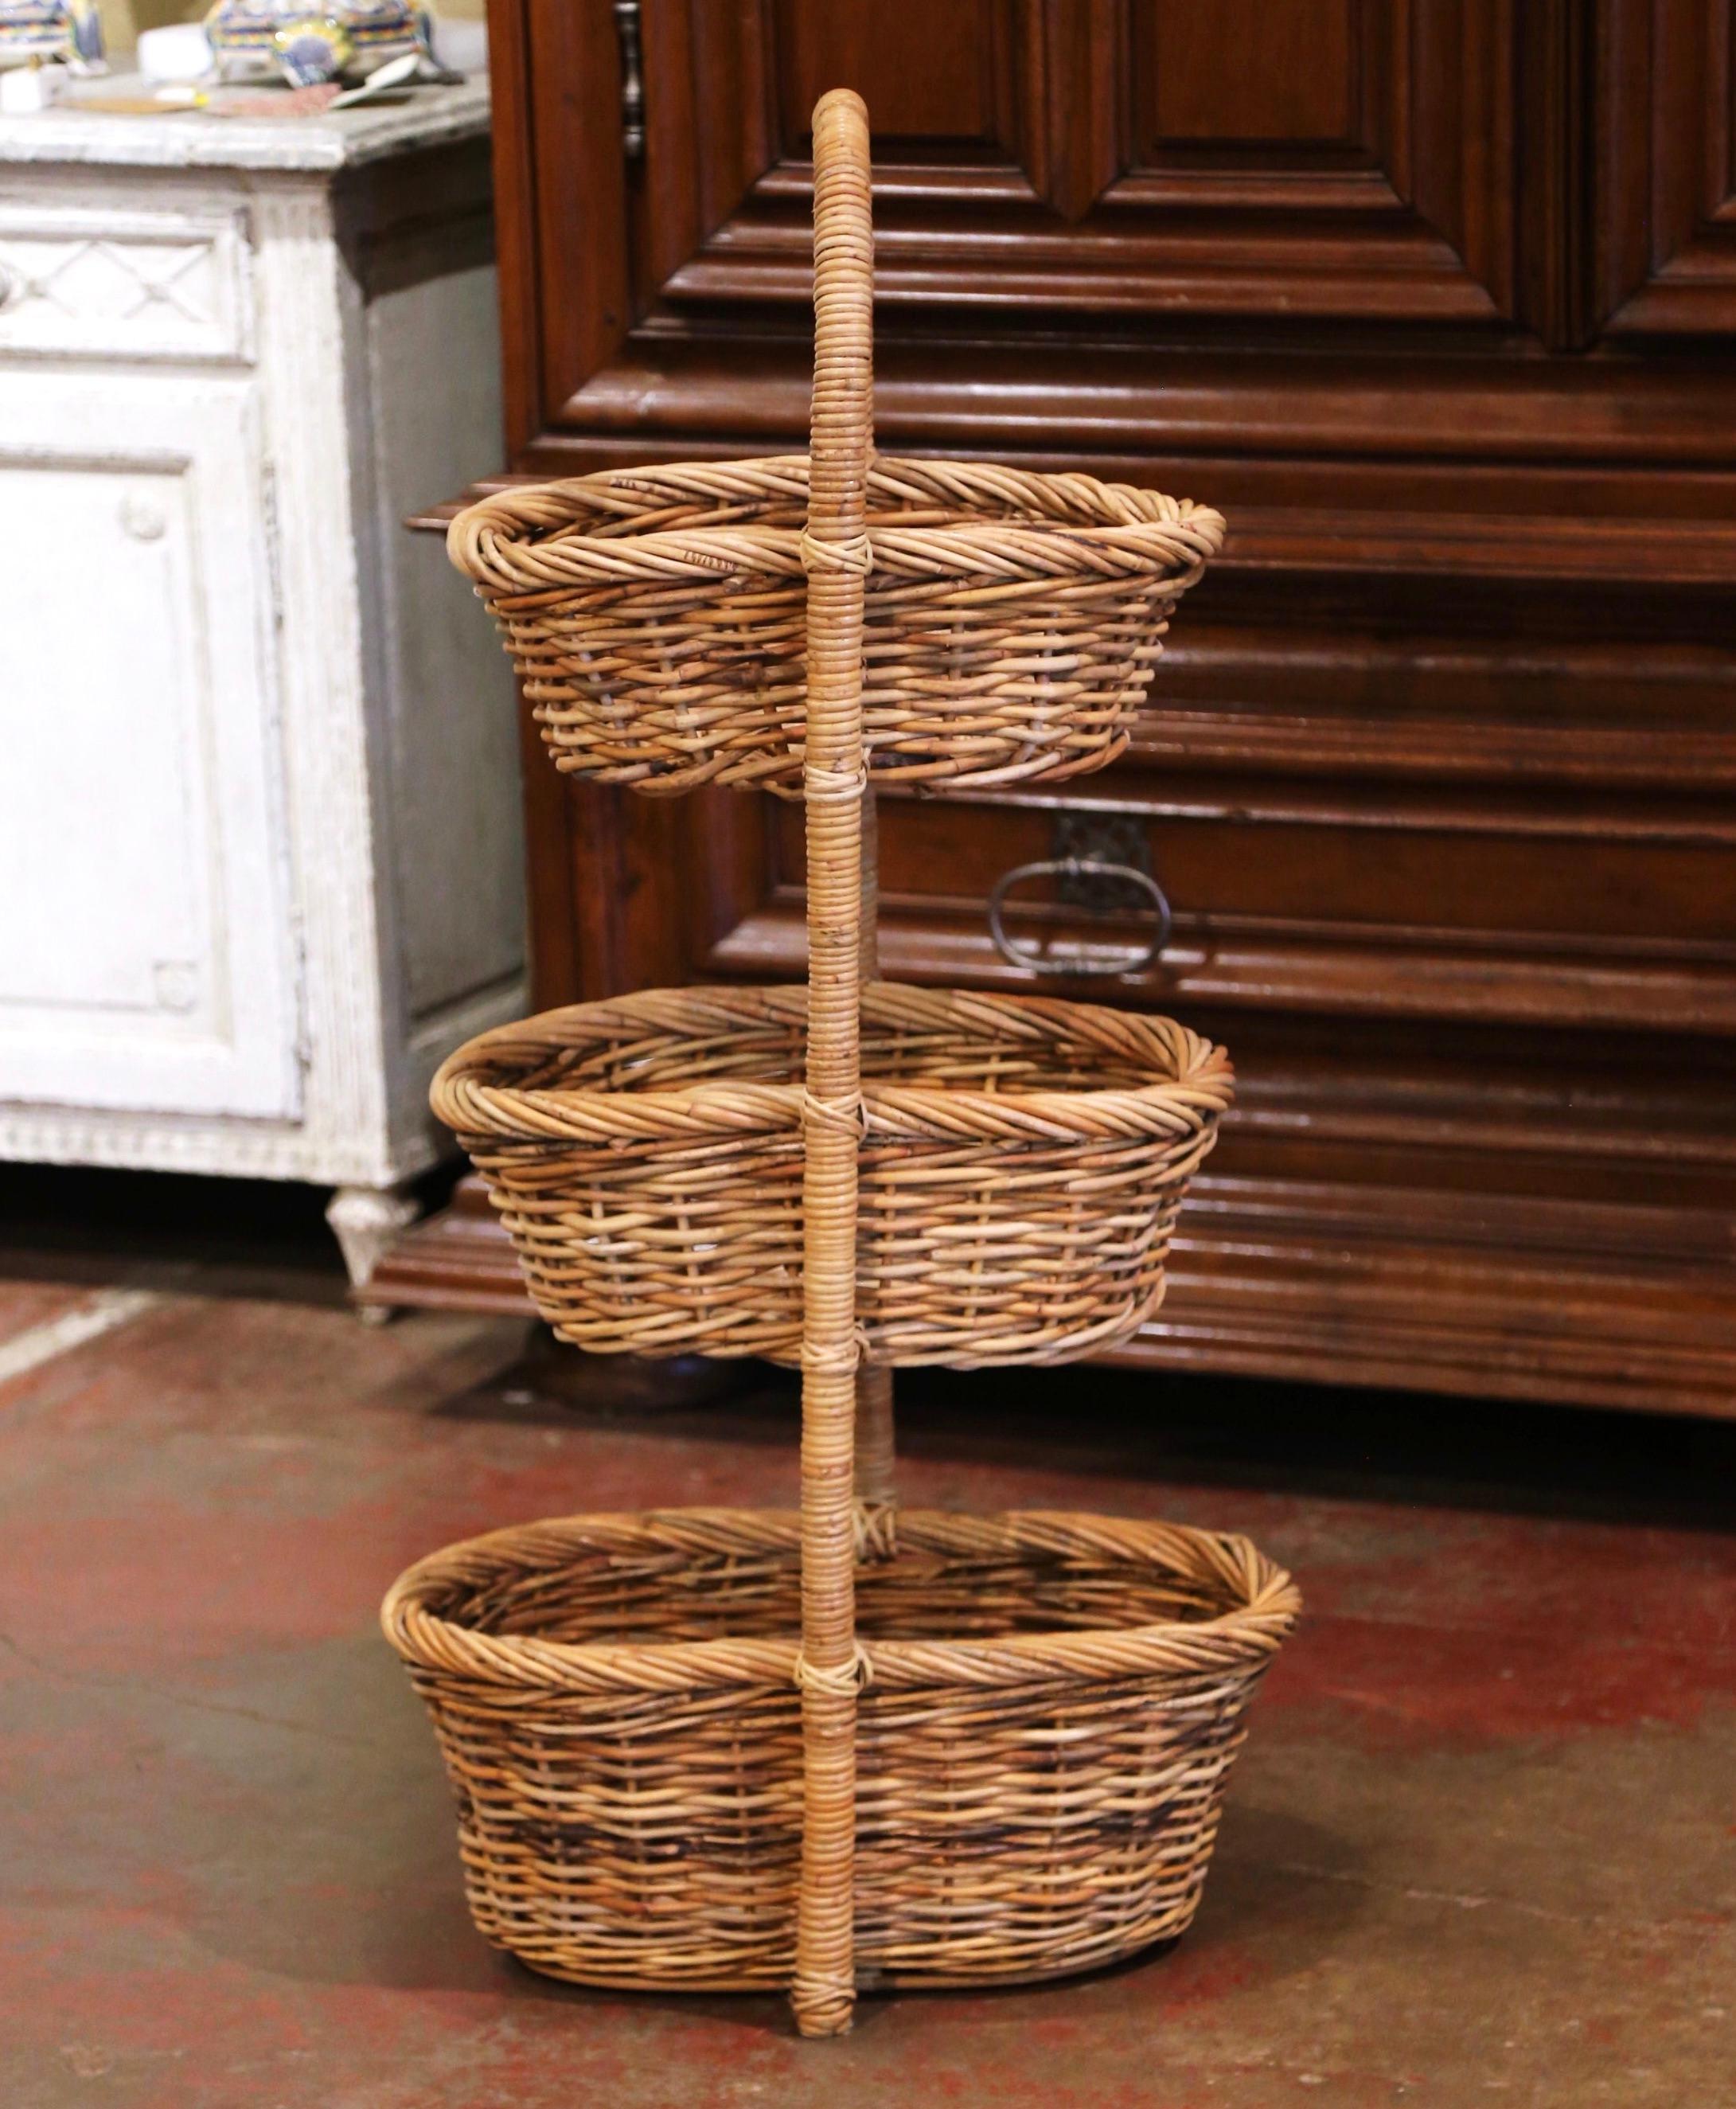 Created in the Normandy region of France circa 1880 and made of handwoven wicker, the antique basket was originally for apple picking and display. The tall three-tier piece features a large wooden handle at the pediment over a trio of stacked oval